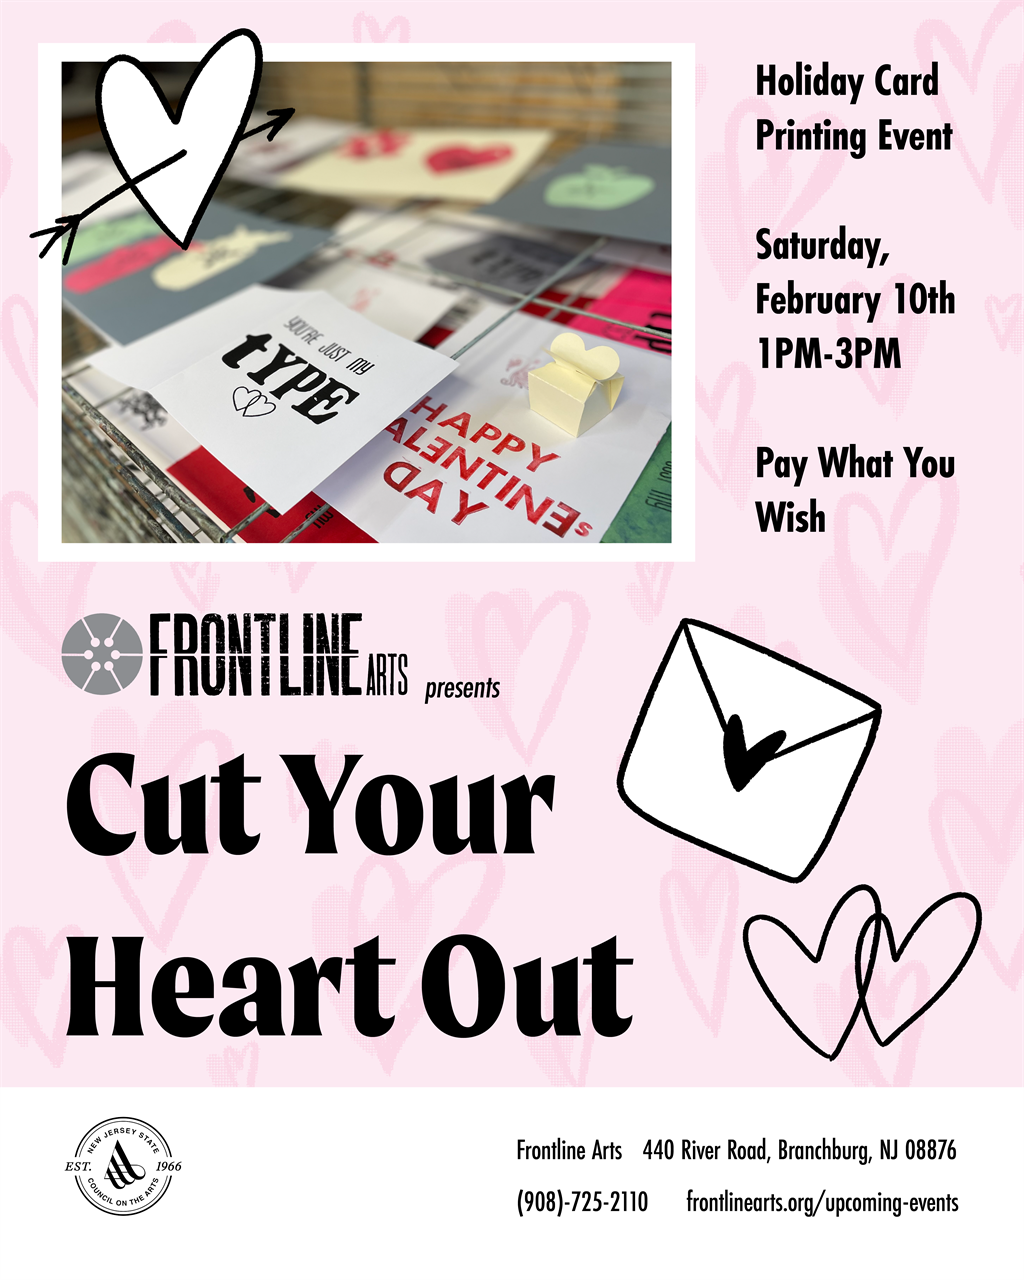 Poster for event. Includes a photo of cards. Text: “Cut Your Heart Out. Holiday Card Printing Event. Saturday February 10th 1pm-3pm. Pay What You Wish.”